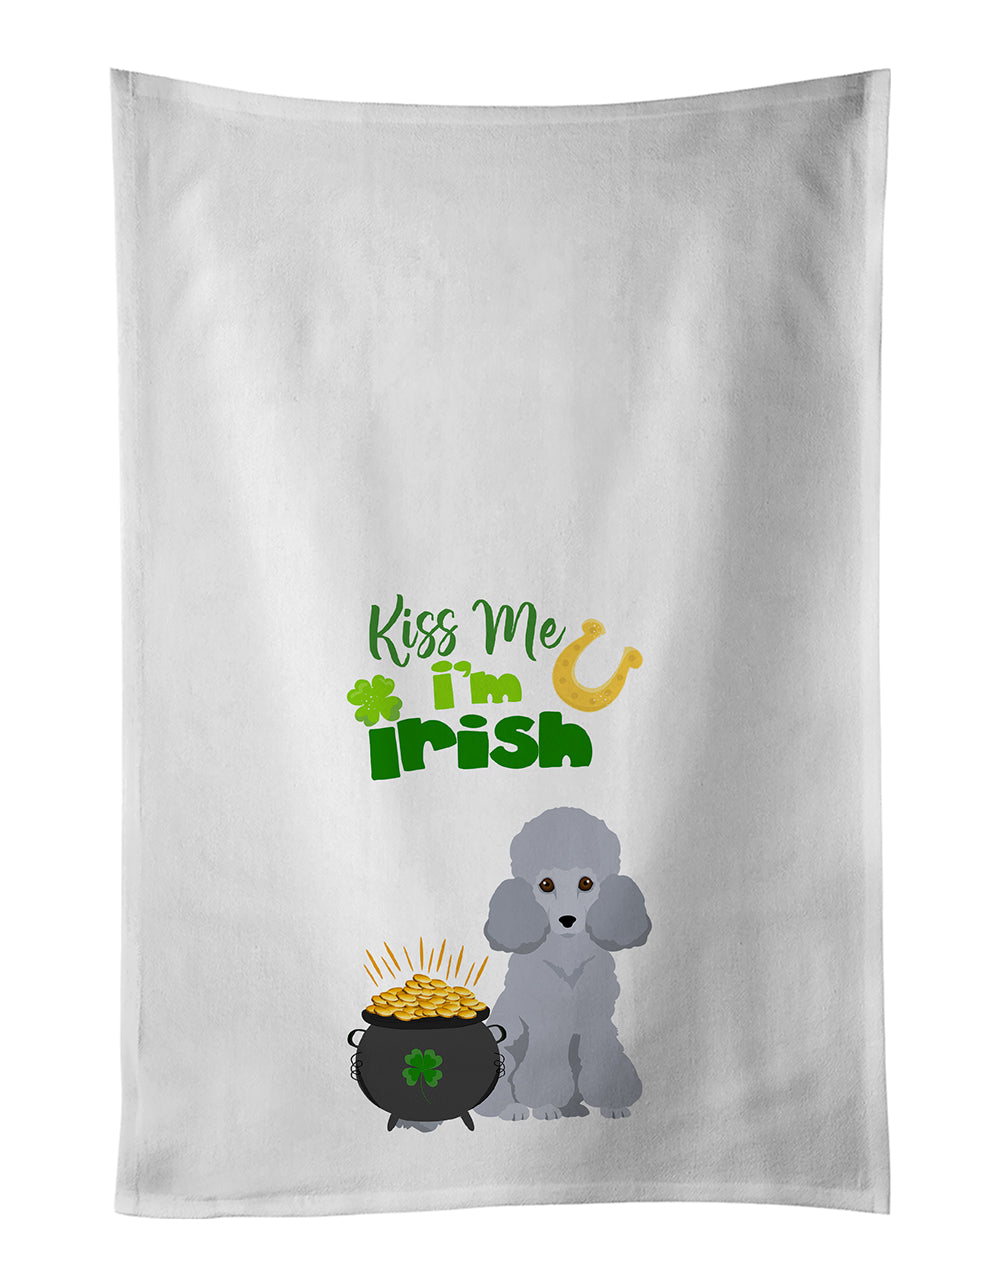 Buy this Toy Silver Poodle St. Patrick's Day White Kitchen Towel Set of 2 Dish Towels